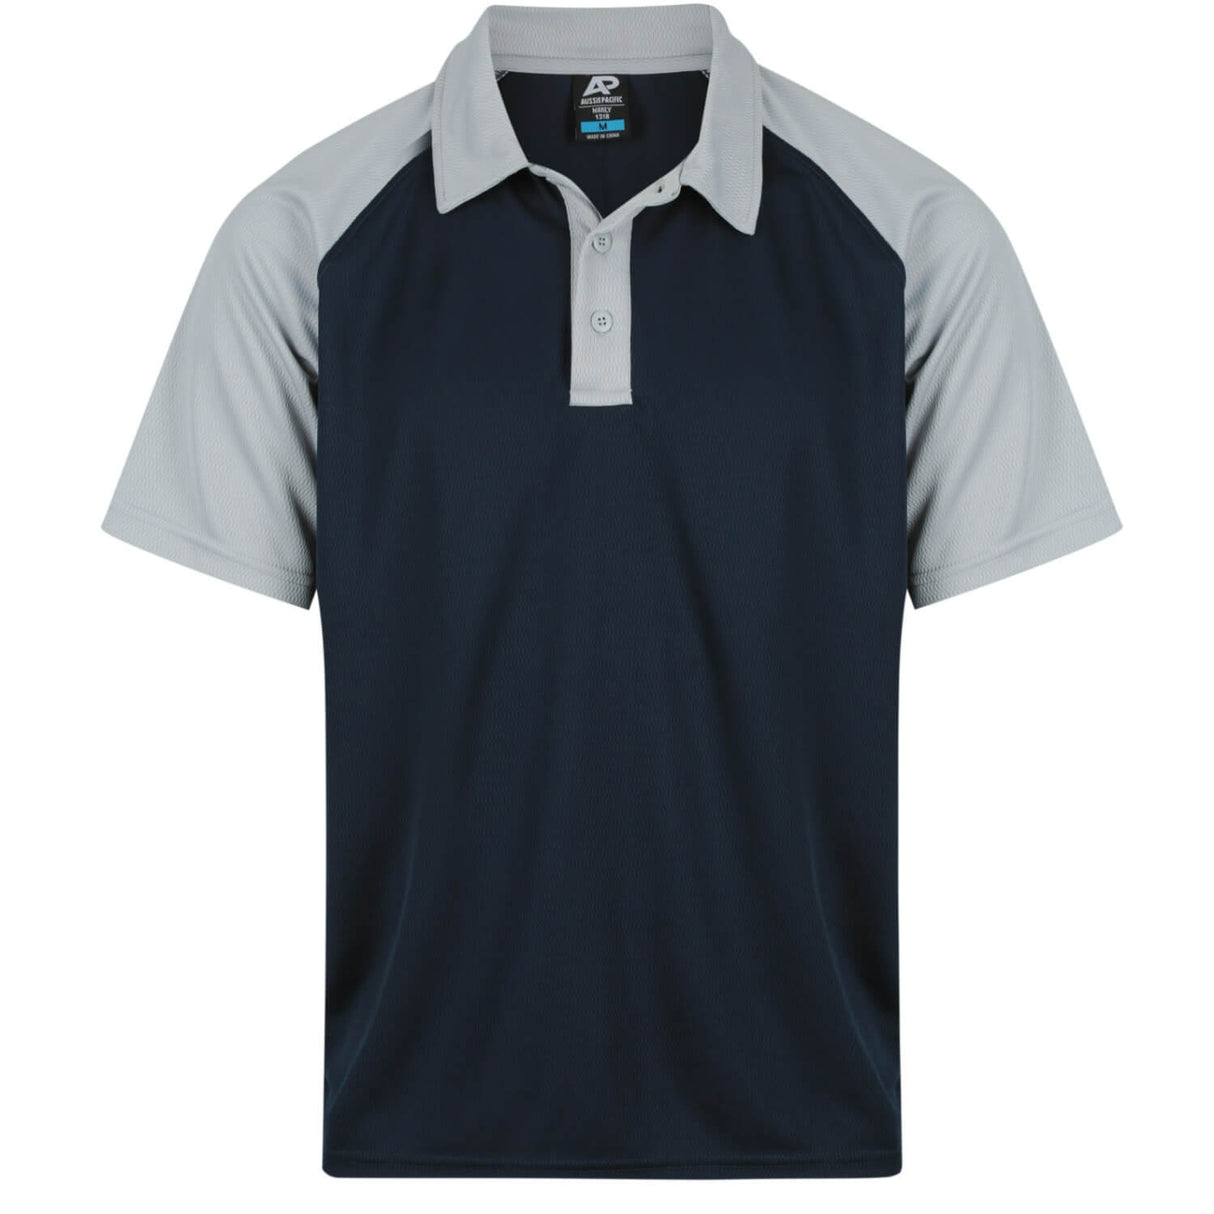 1318 Aussie Pacific Manly Mens Polos Short Sleeve - Dark Colours